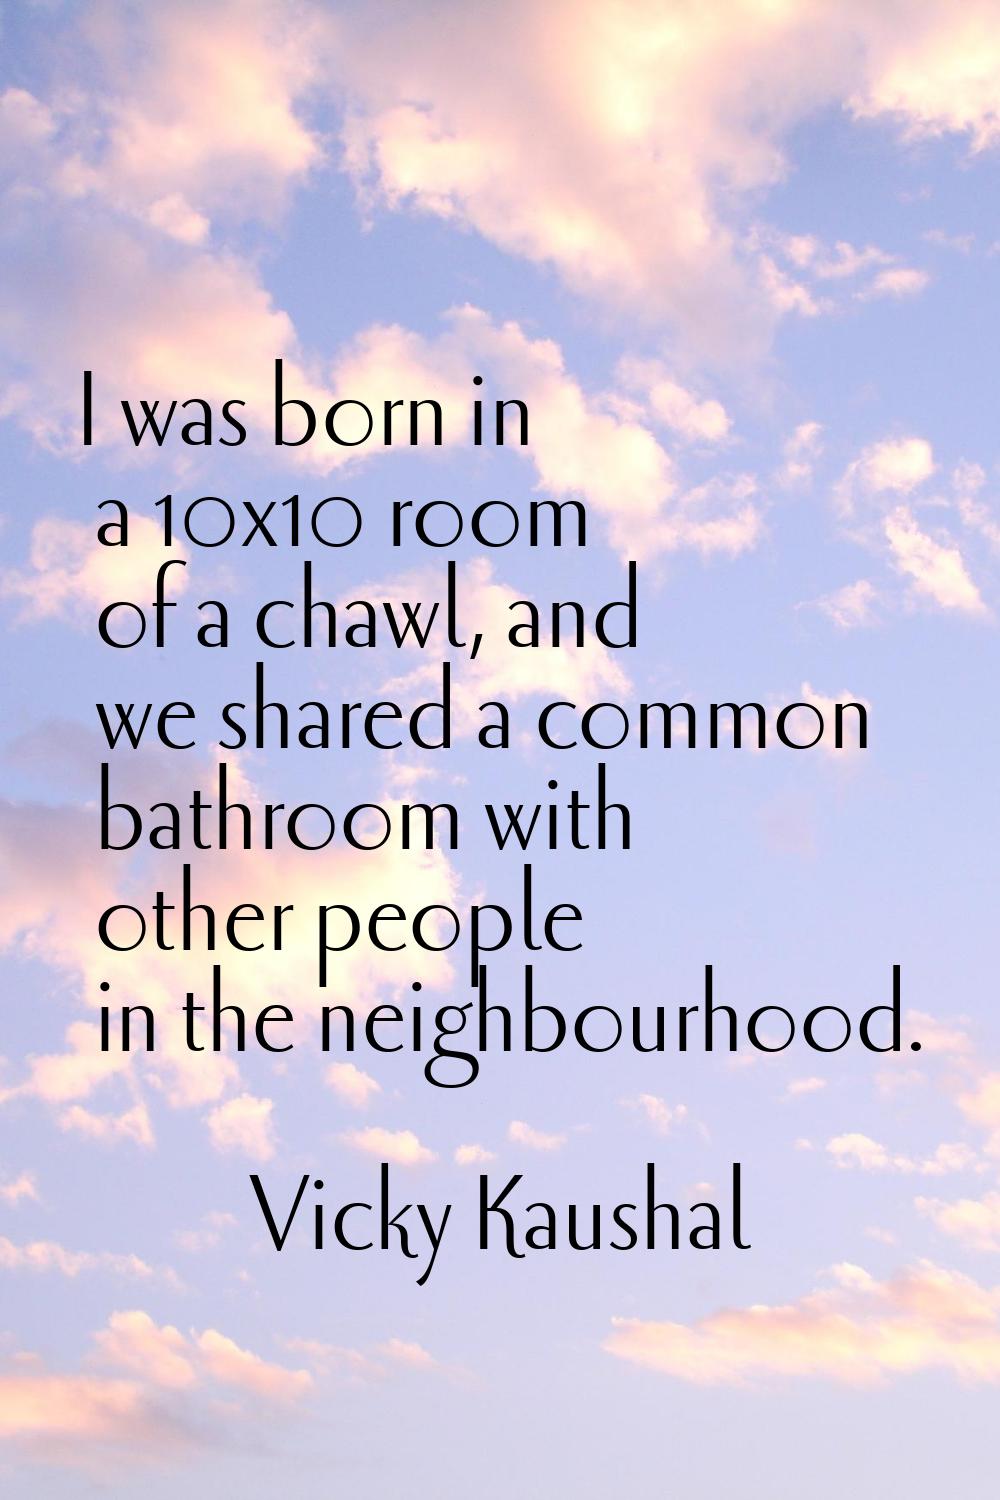 I was born in a 10x10 room of a chawl, and we shared a common bathroom with other people in the nei